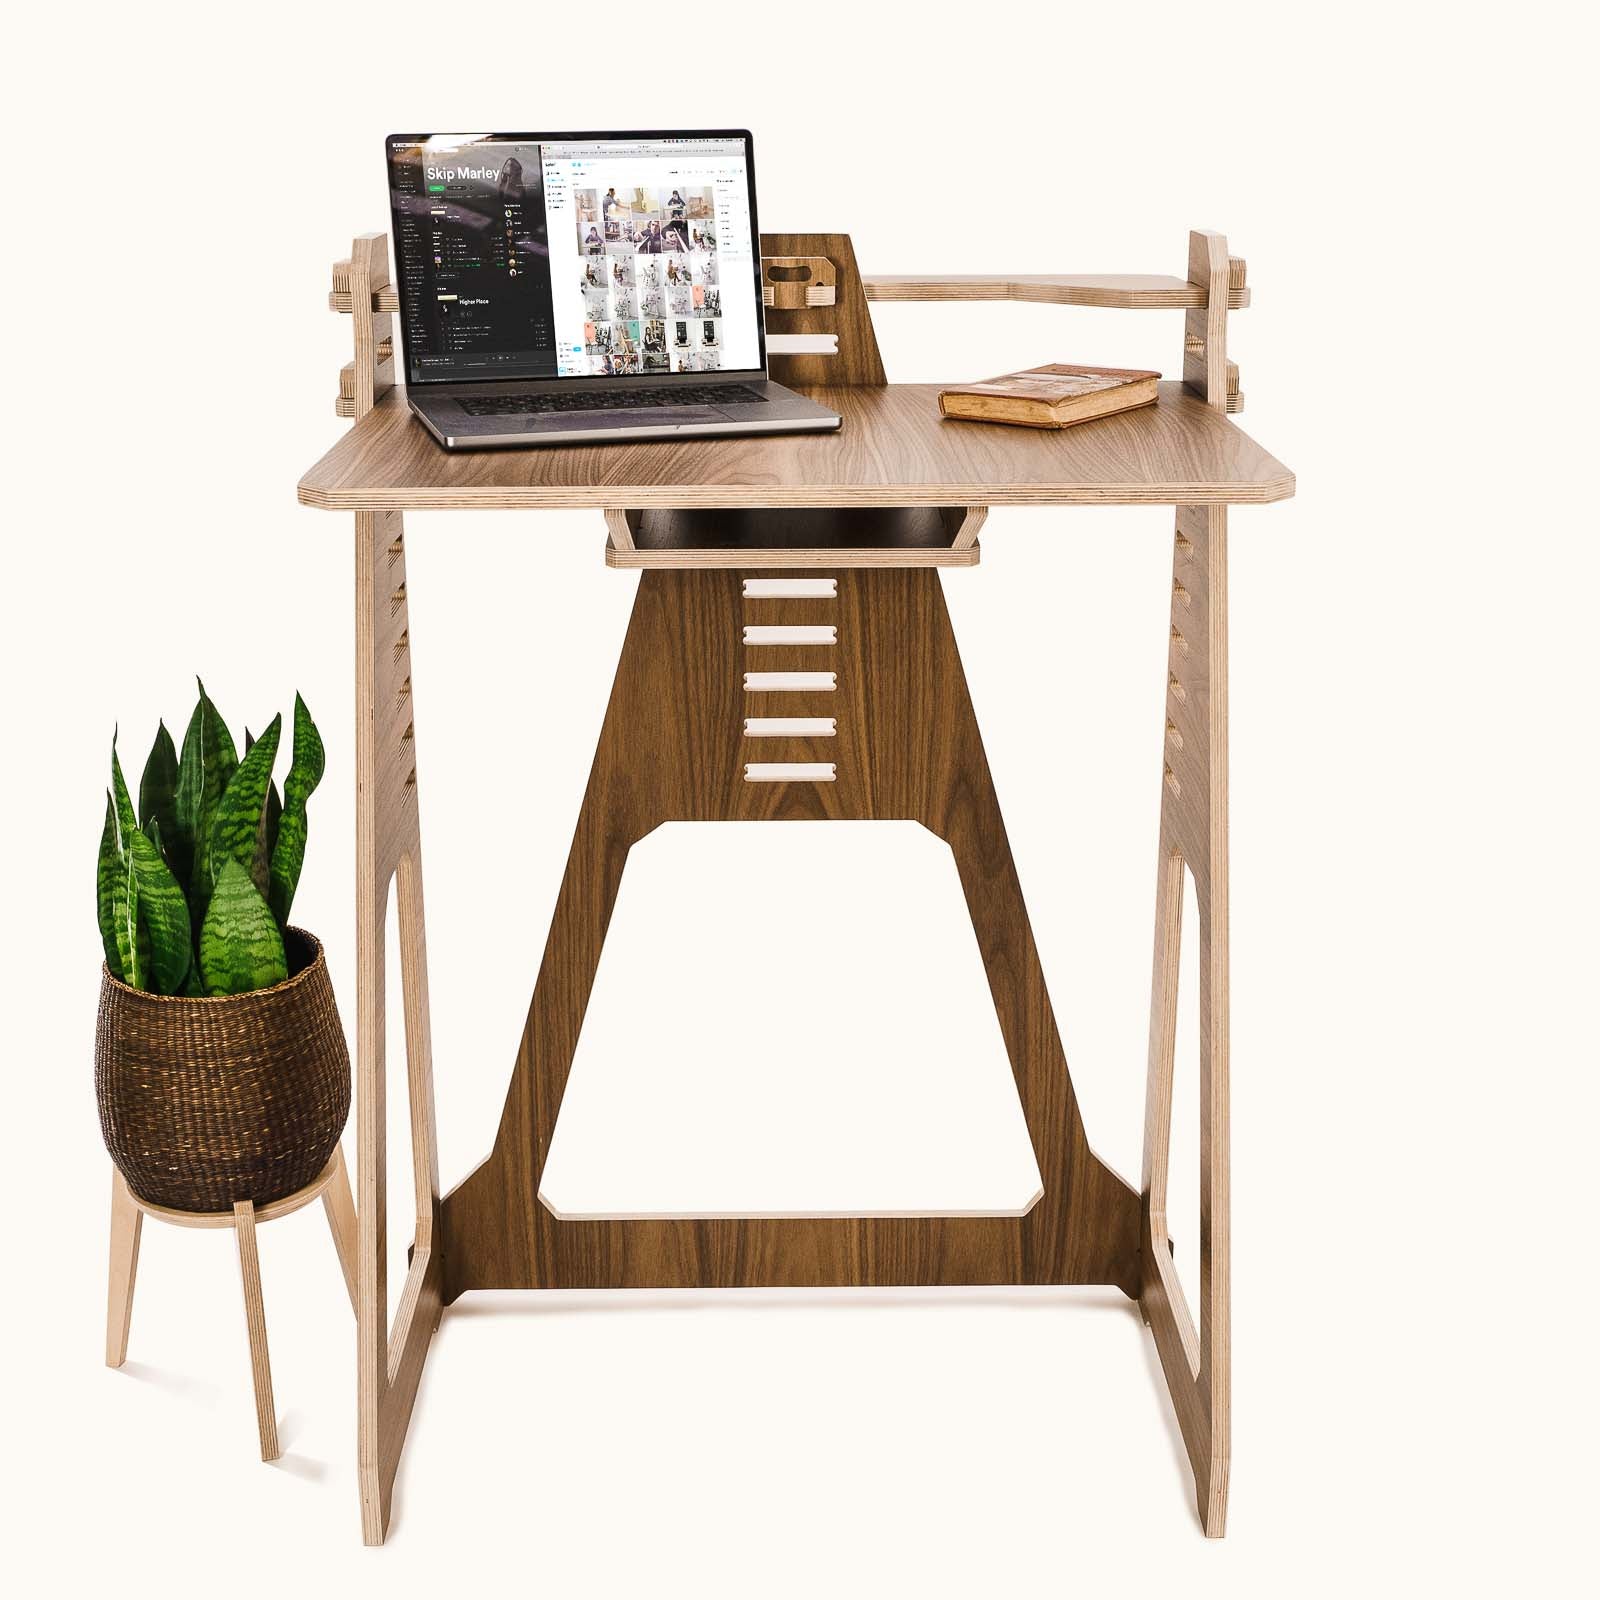 STANDING DESK, Laptop Stand, Wood Work Station, Home Office